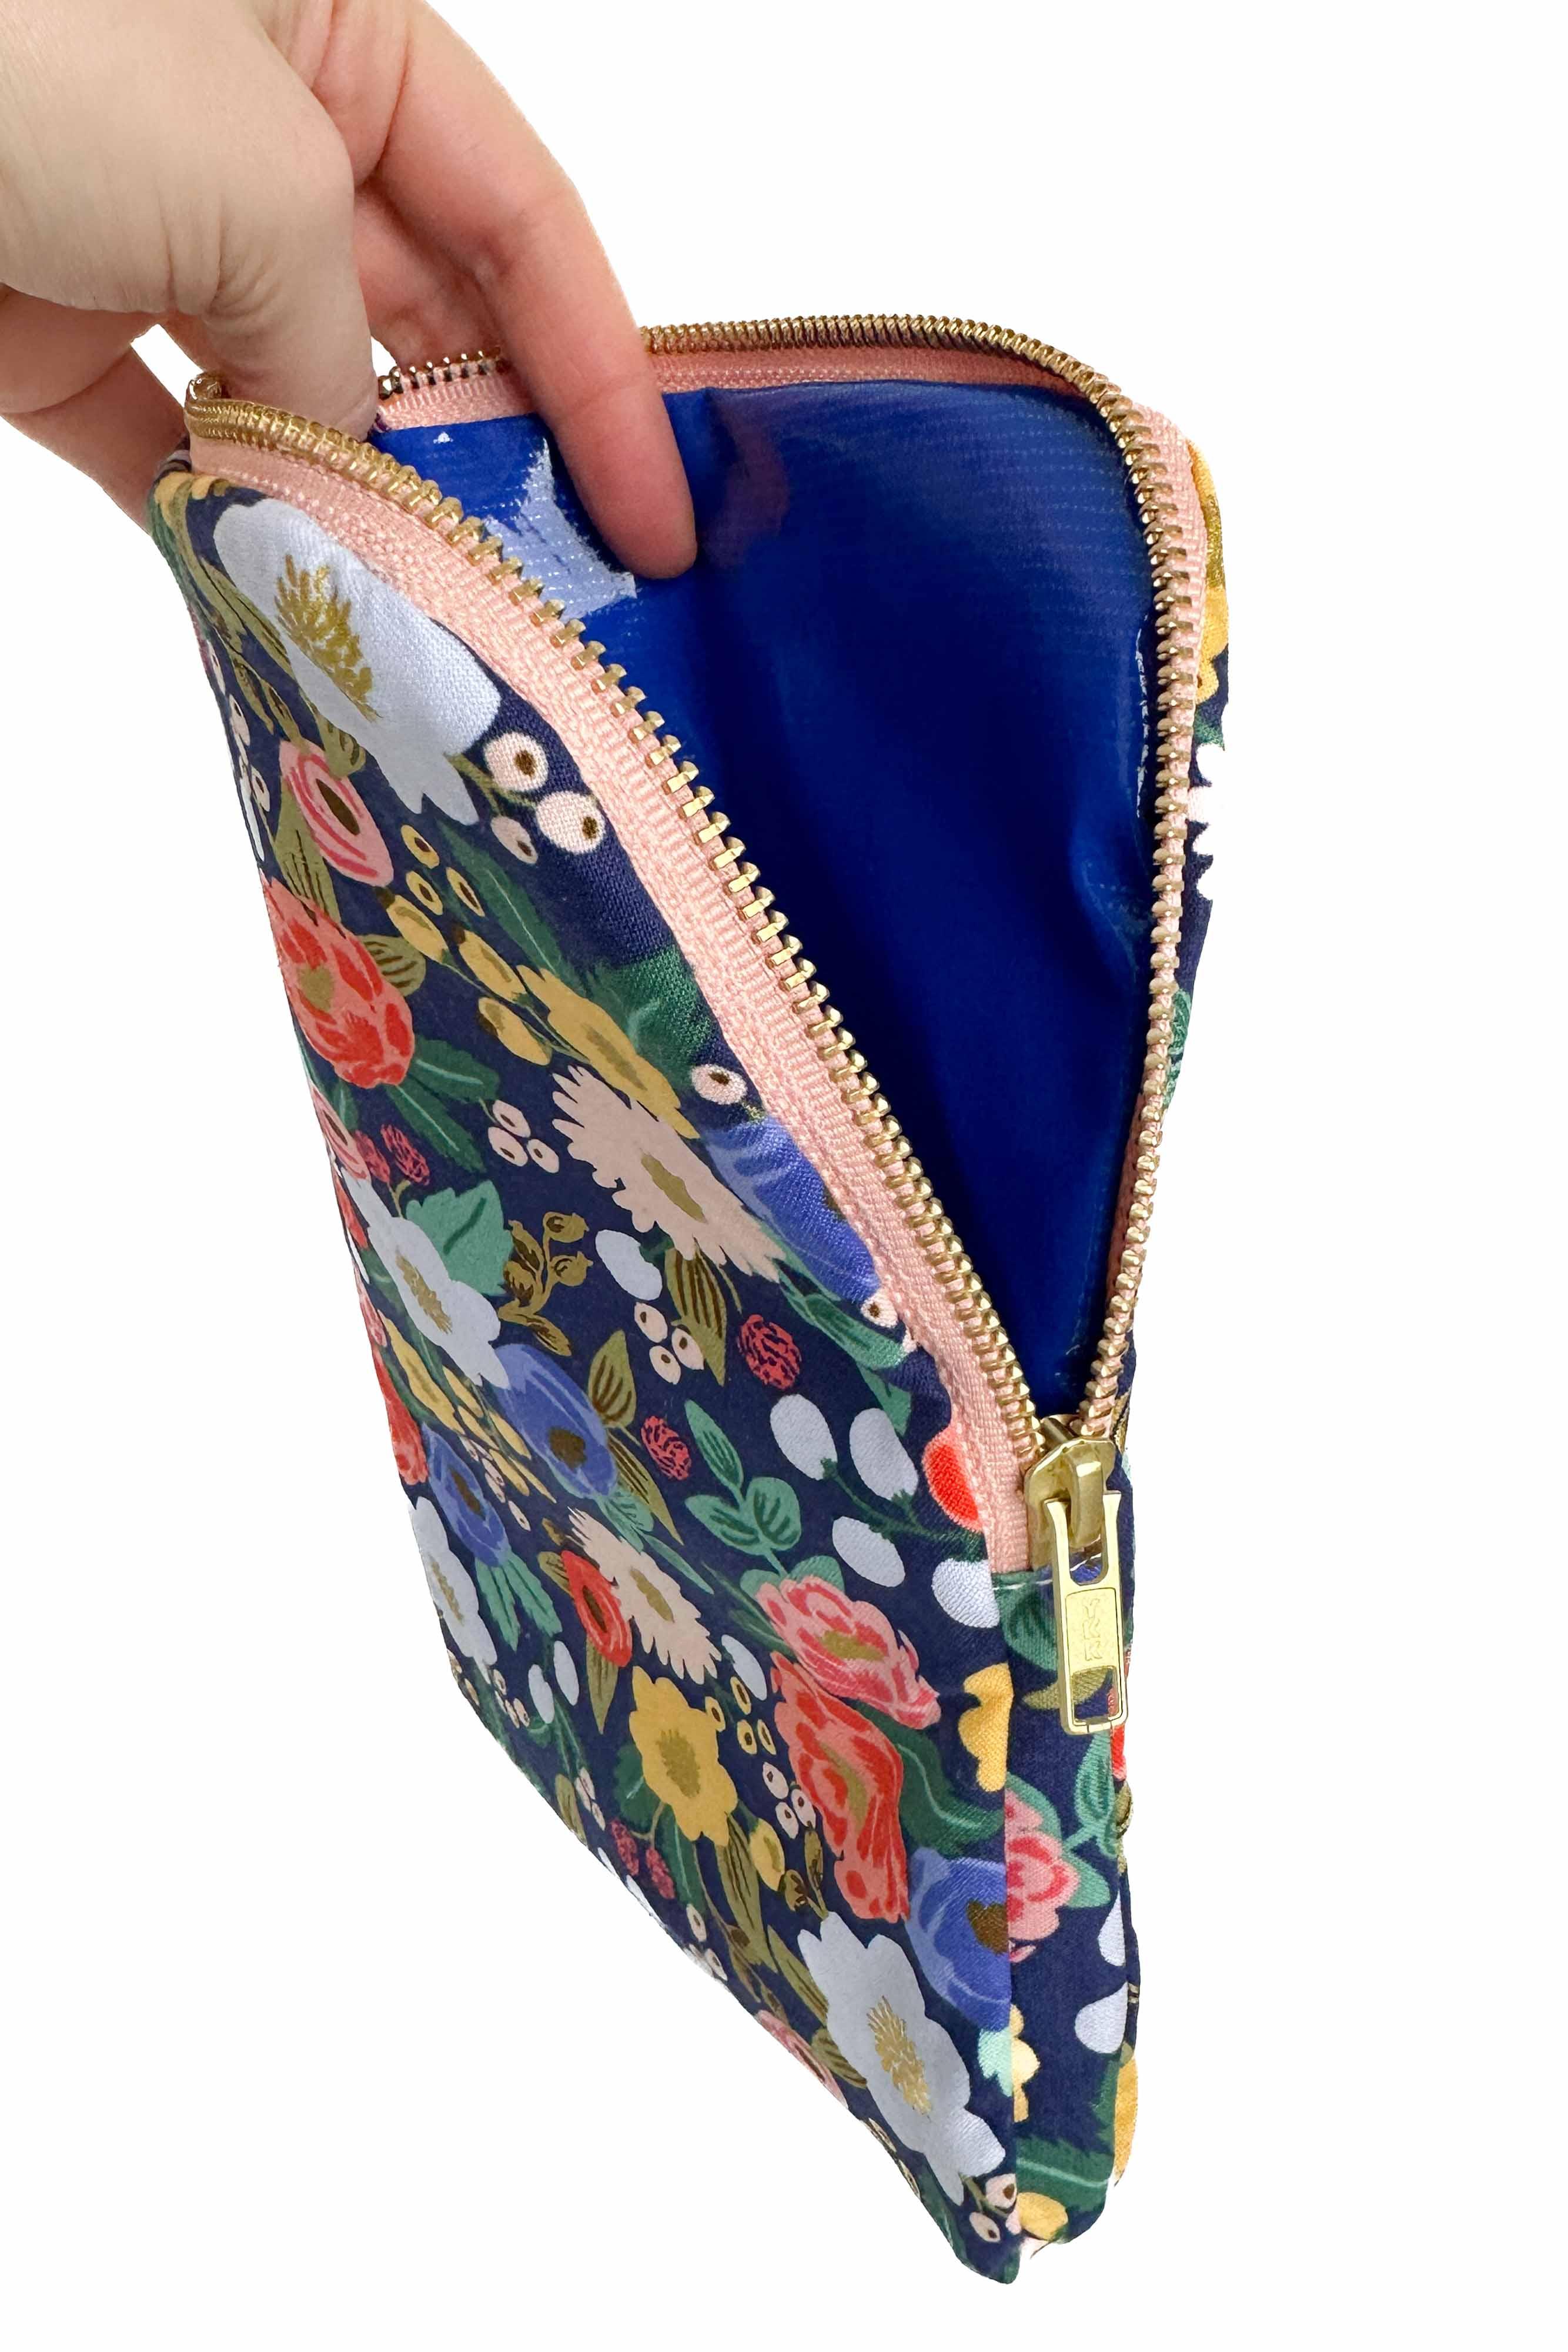 Vintage Garden Everyday Diaper Pouch READY TO SHIP - Modern Makerie